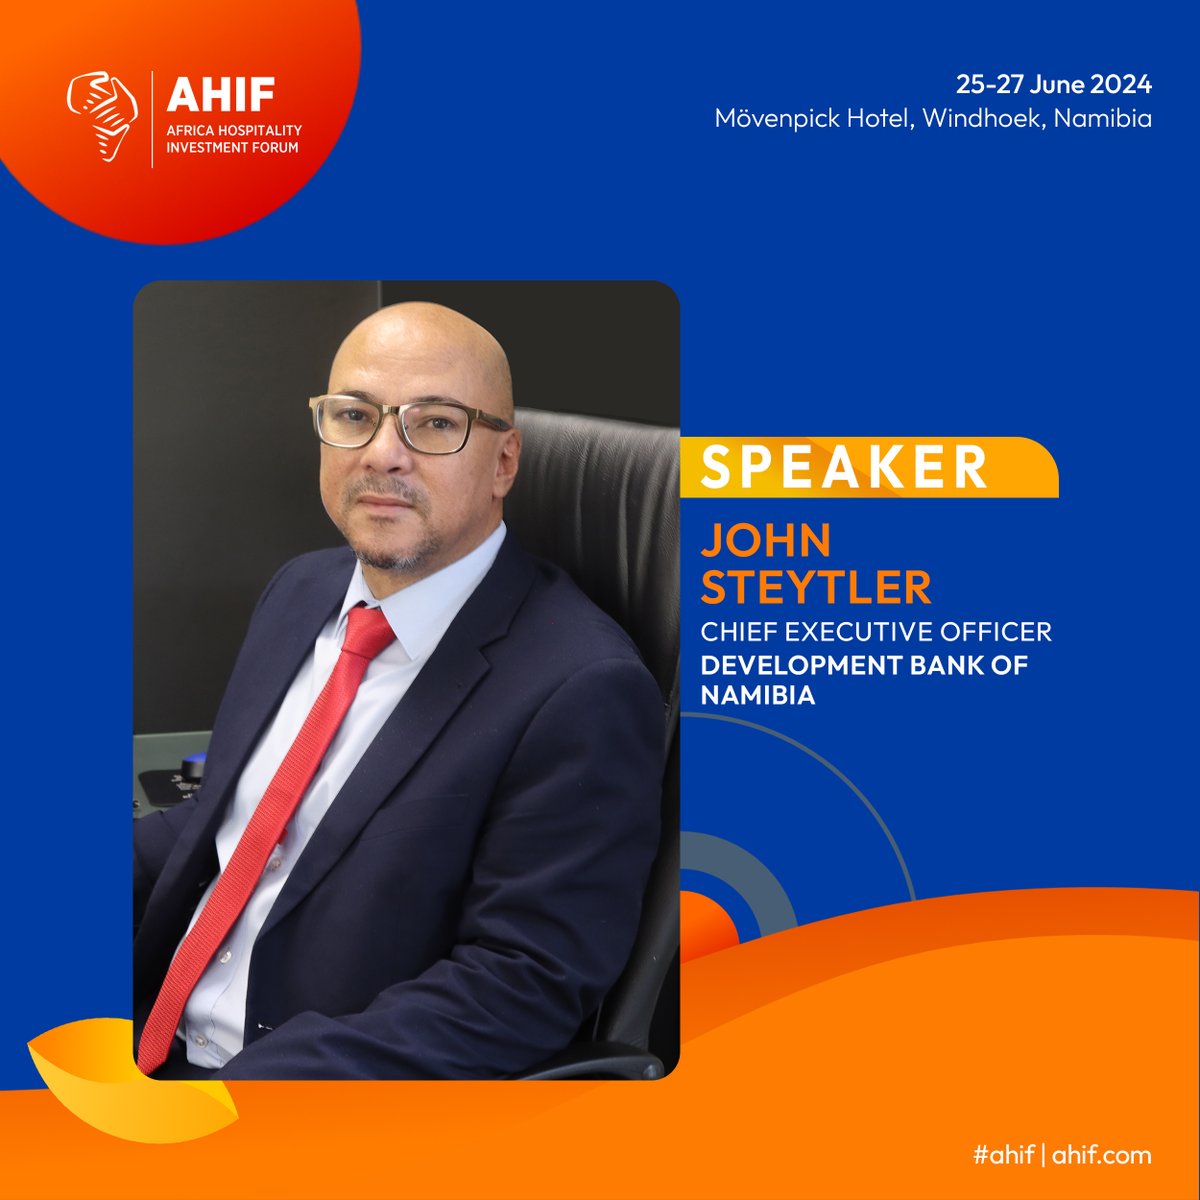 Don't miss Dr. John Steytler, architect of Namibia's economic rise, share his insights at AHIF! Register today to network with C-Level executives from across the hospitality sector! hubs.la/Q02sdnk20